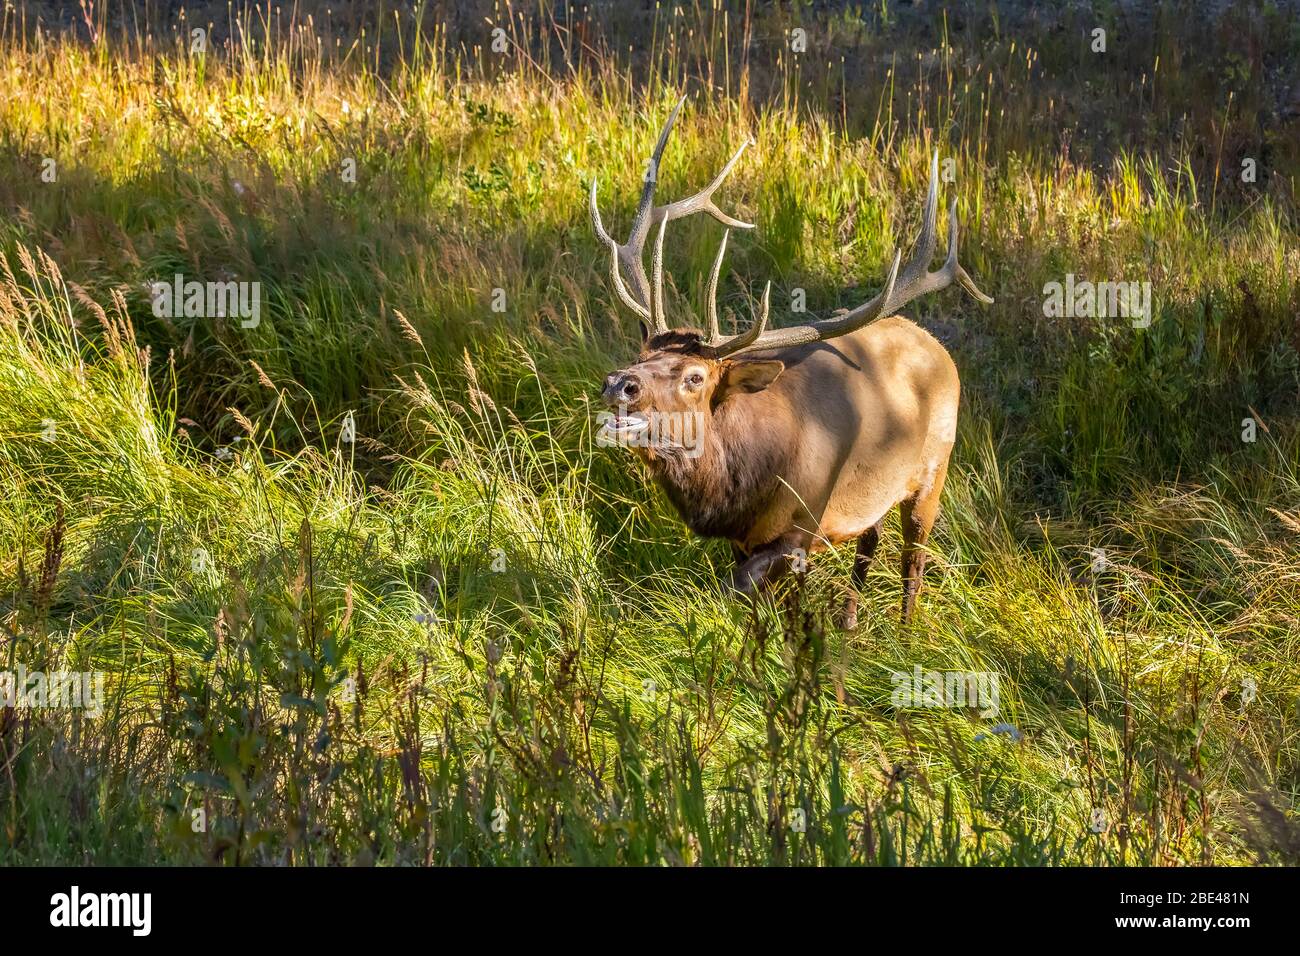 Bull elk (Cervus canadensis) standing in tall green grass; Estes Park, Colorado, United States of America Stock Photo